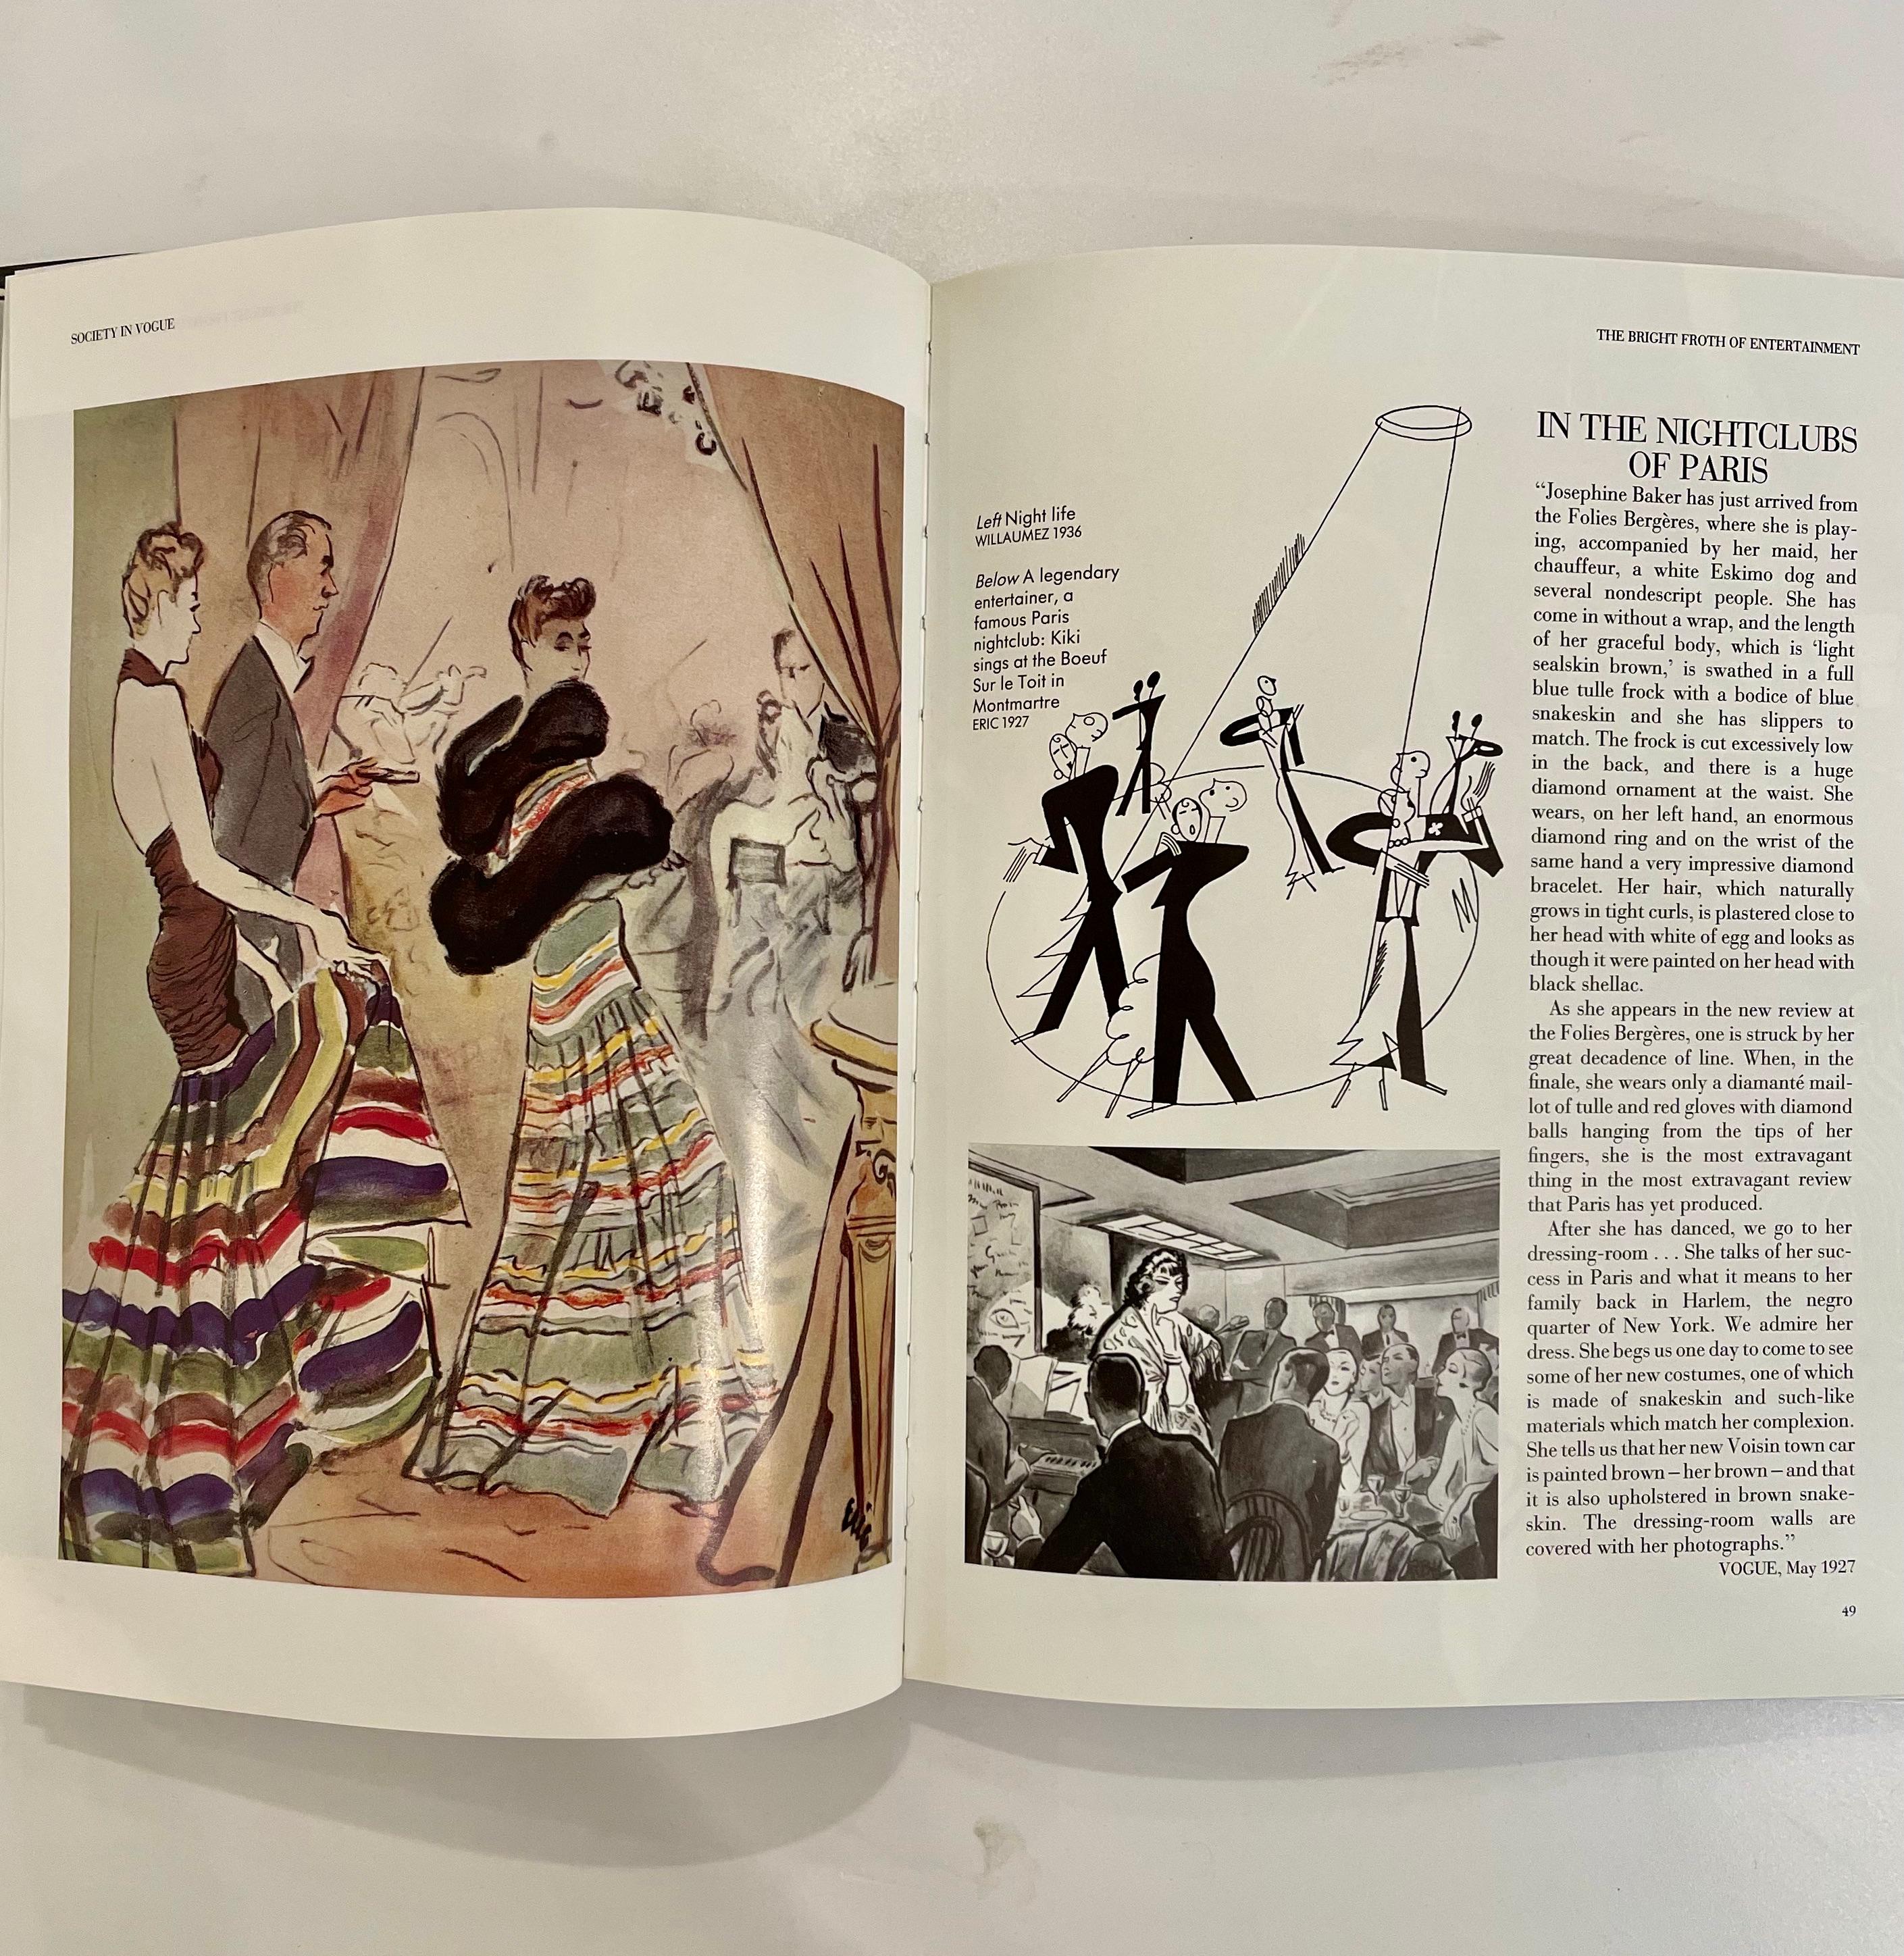 First Edition, published by Condé Nast Publications, 1992.

'Society in Vogue' chronicles the heady, heedless period of inimitable glamour and luxury which Vogue magazine reflected in the years between the wars - the world of Edward VIII and Mrs